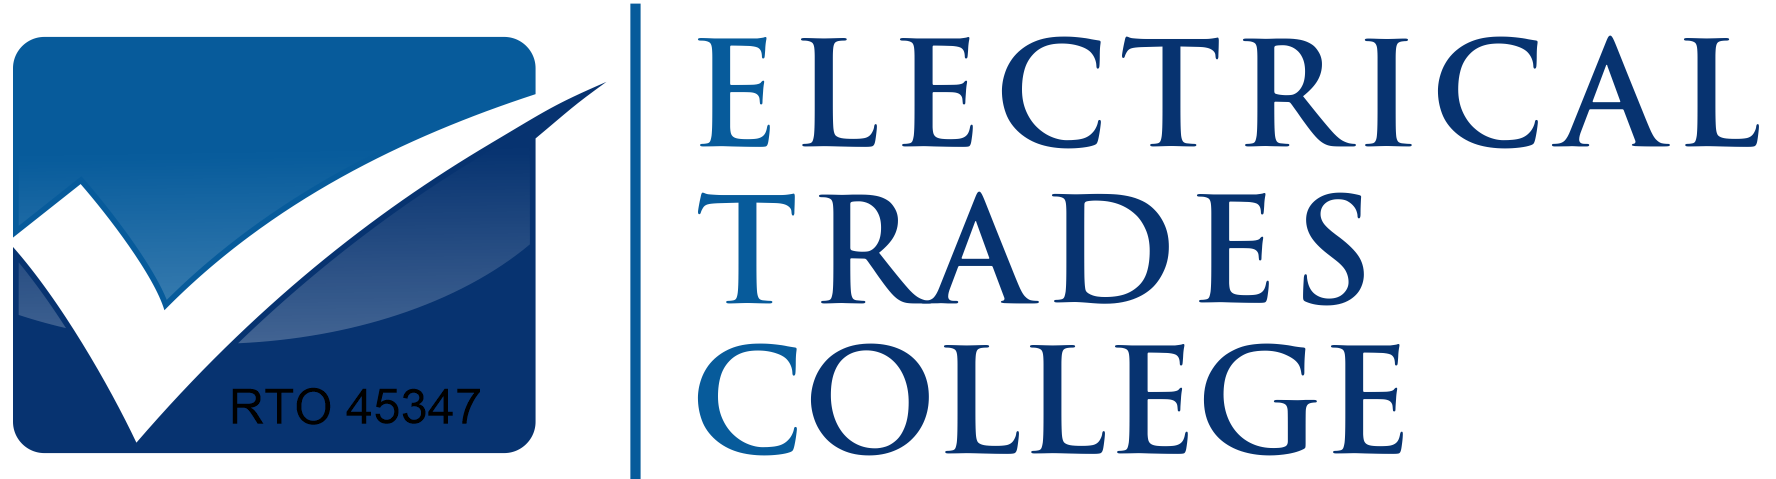 Electrical Trades College